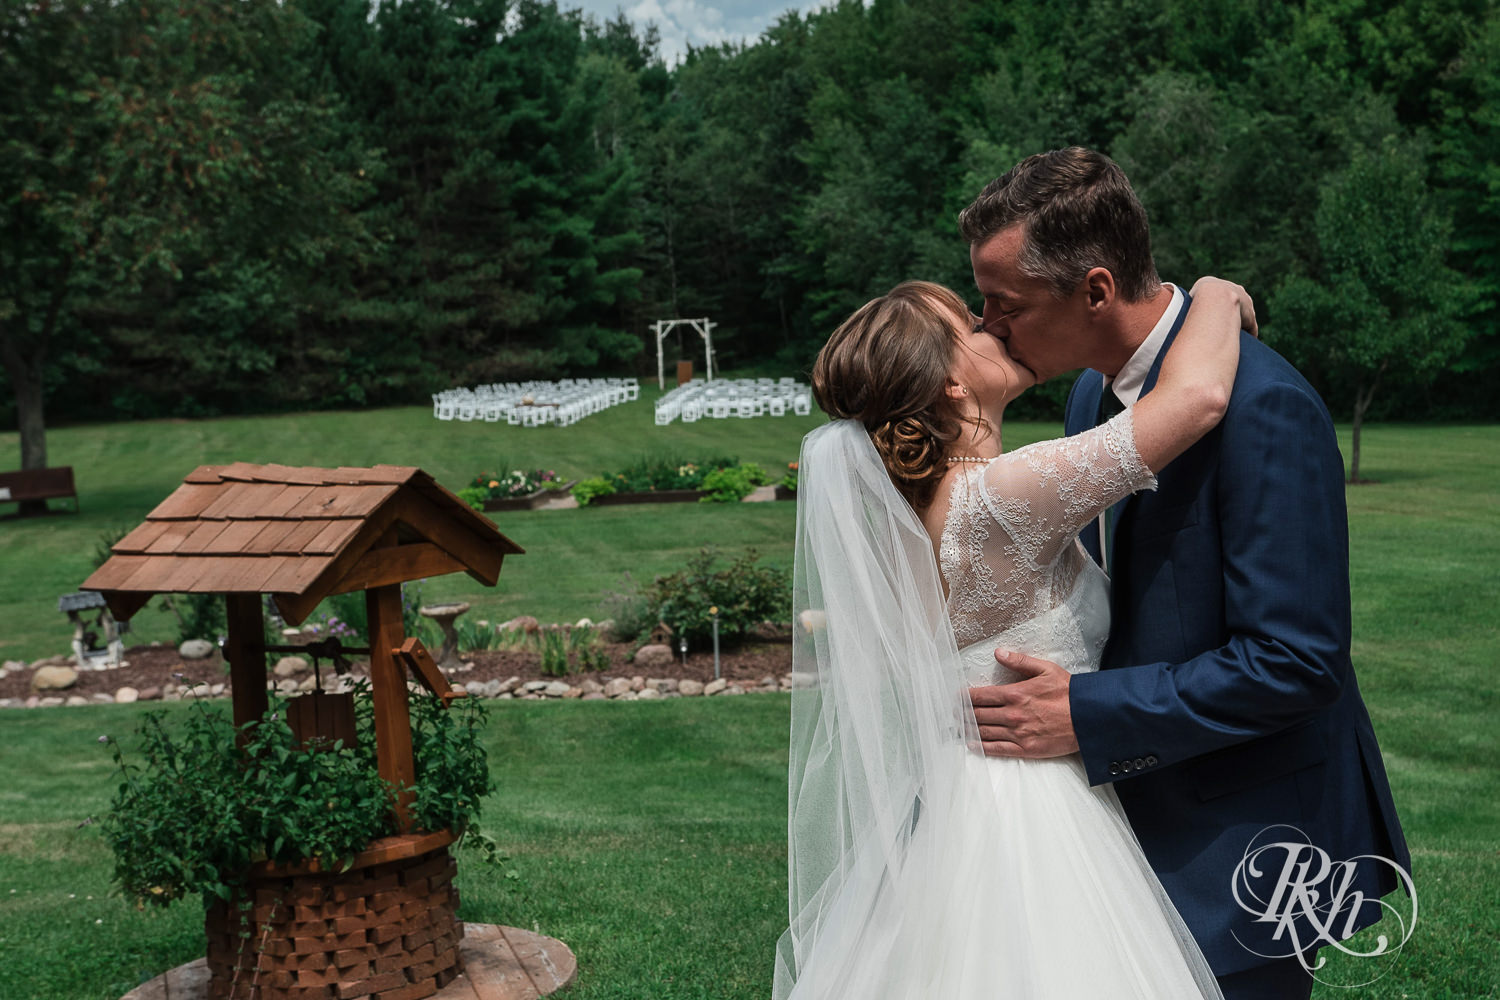 Bride and groom kiss during first look on wedding day in Elk Mound, Wisconsin.